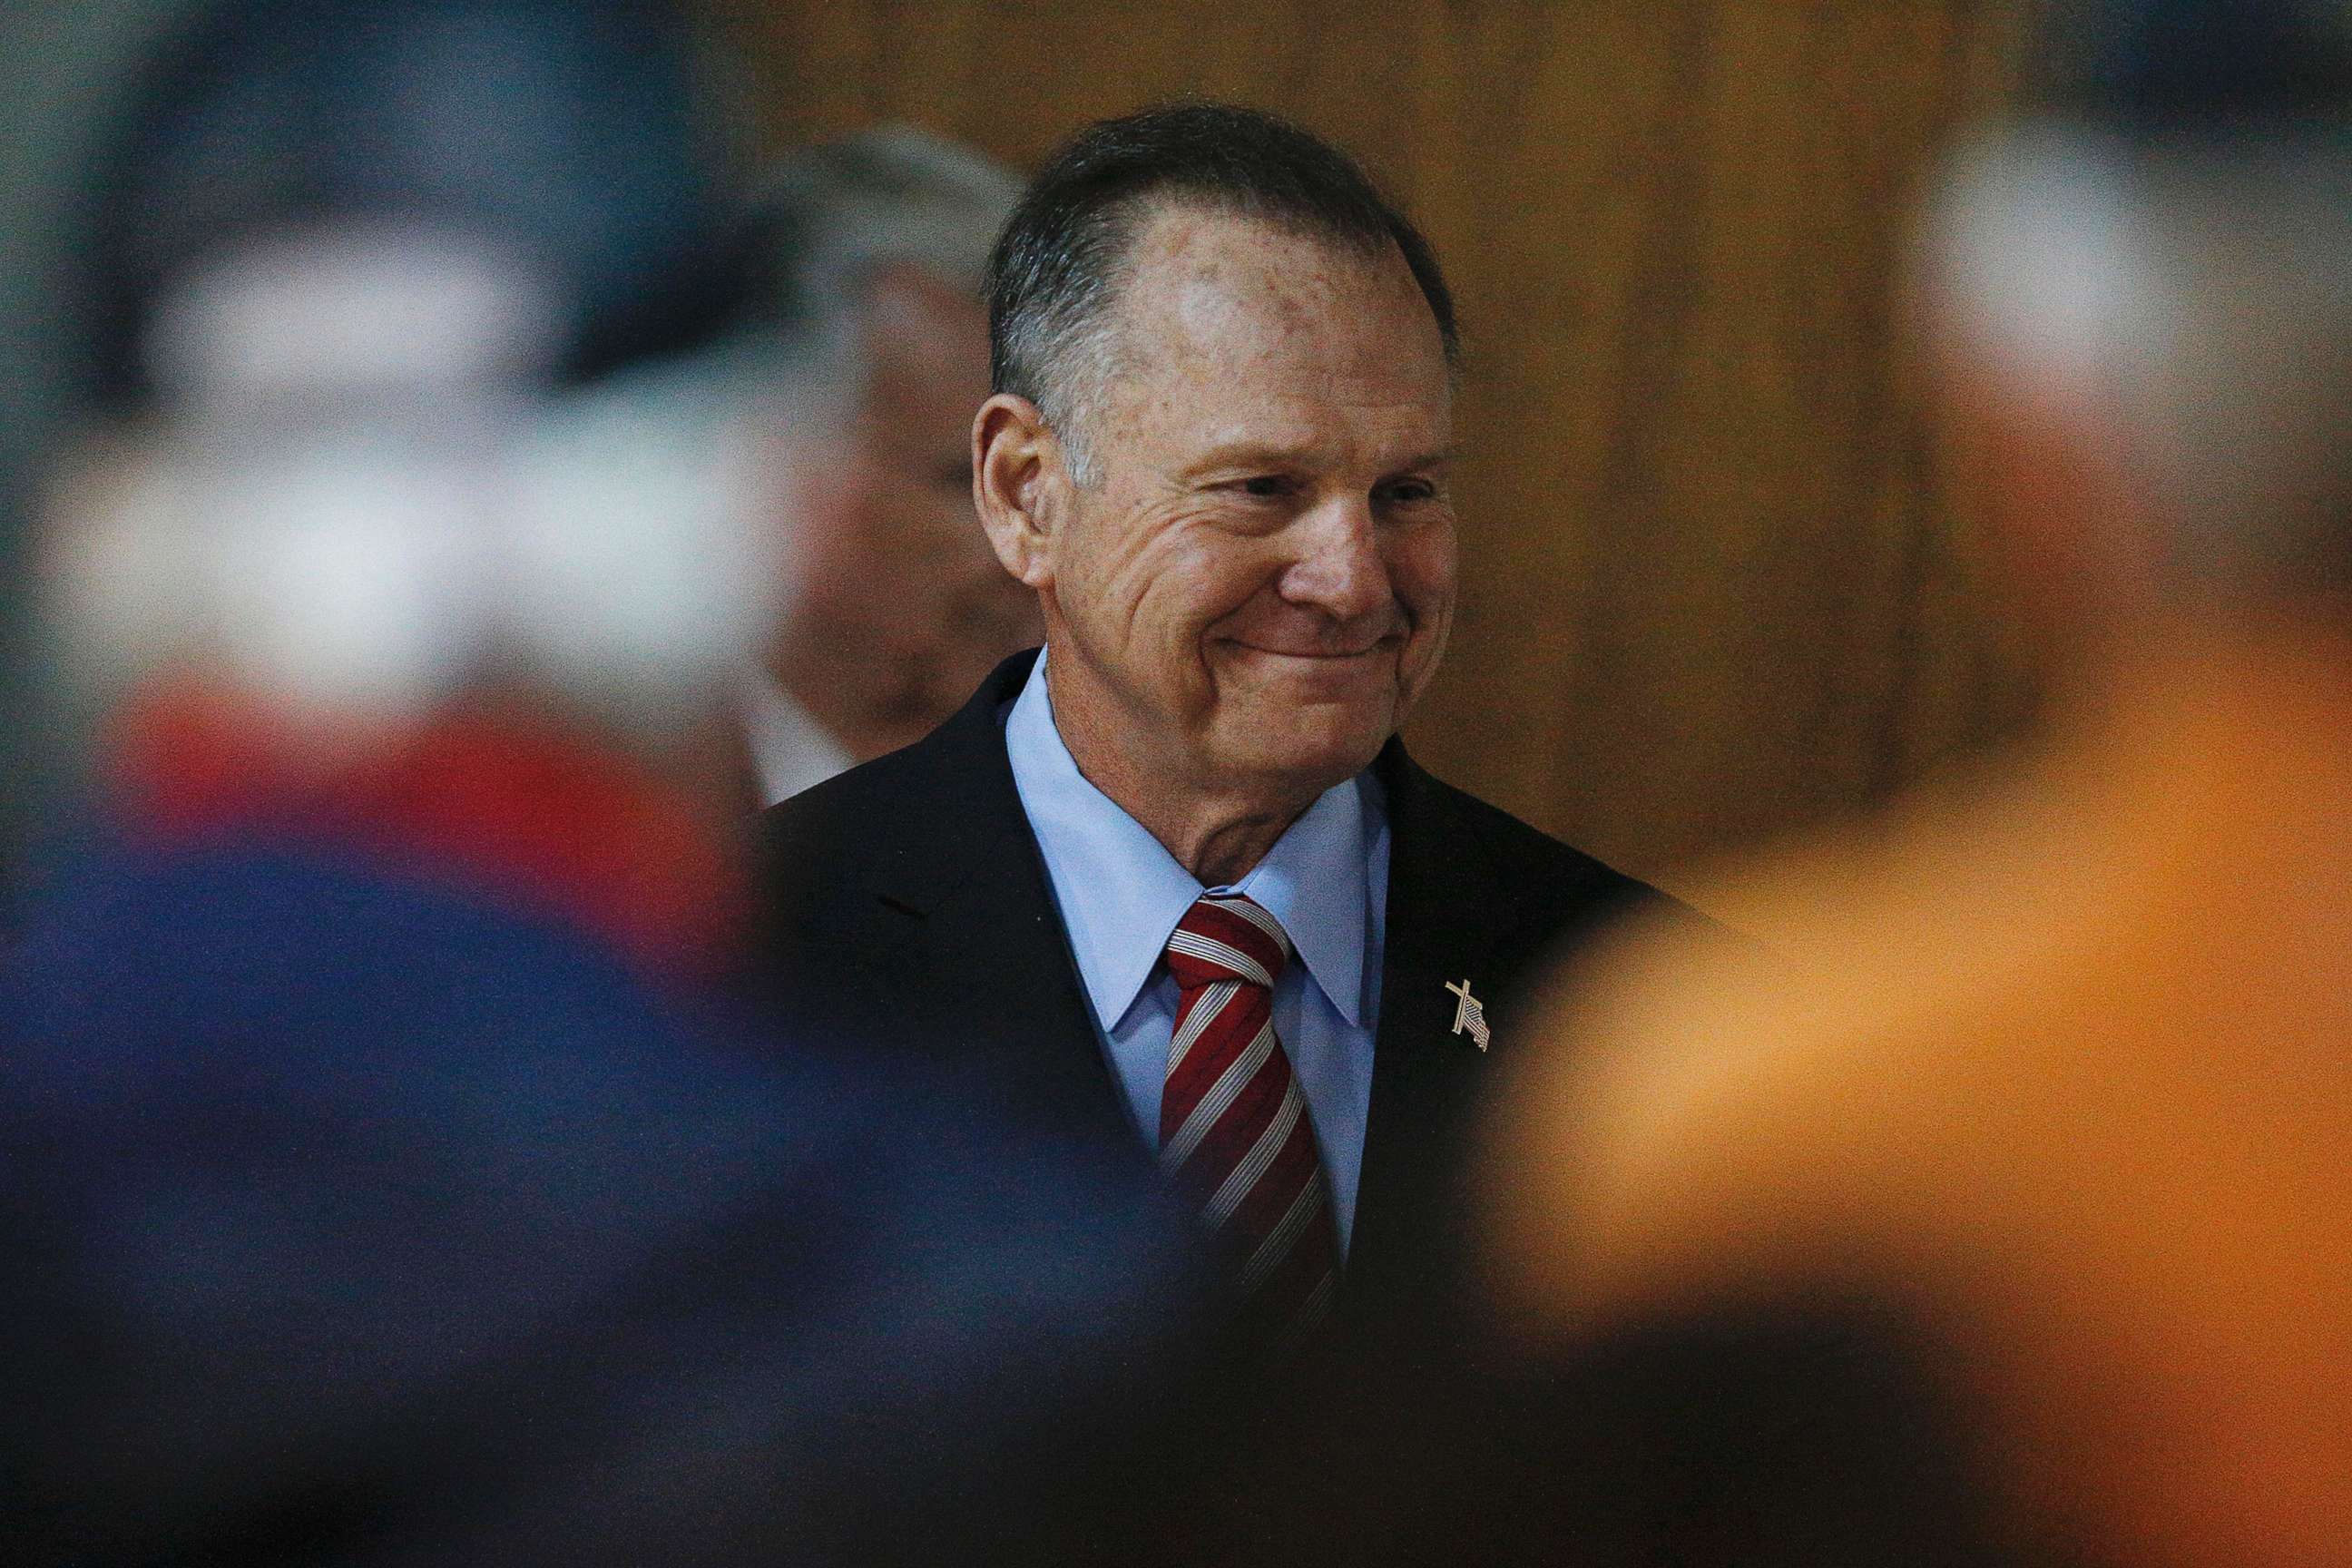 PHOTO: Former Alabama Chief Justice and U.S. Senate candidate Roy Moore speaks at a campaign rally, Nov. 27, 2017, in Henagar, Ala.